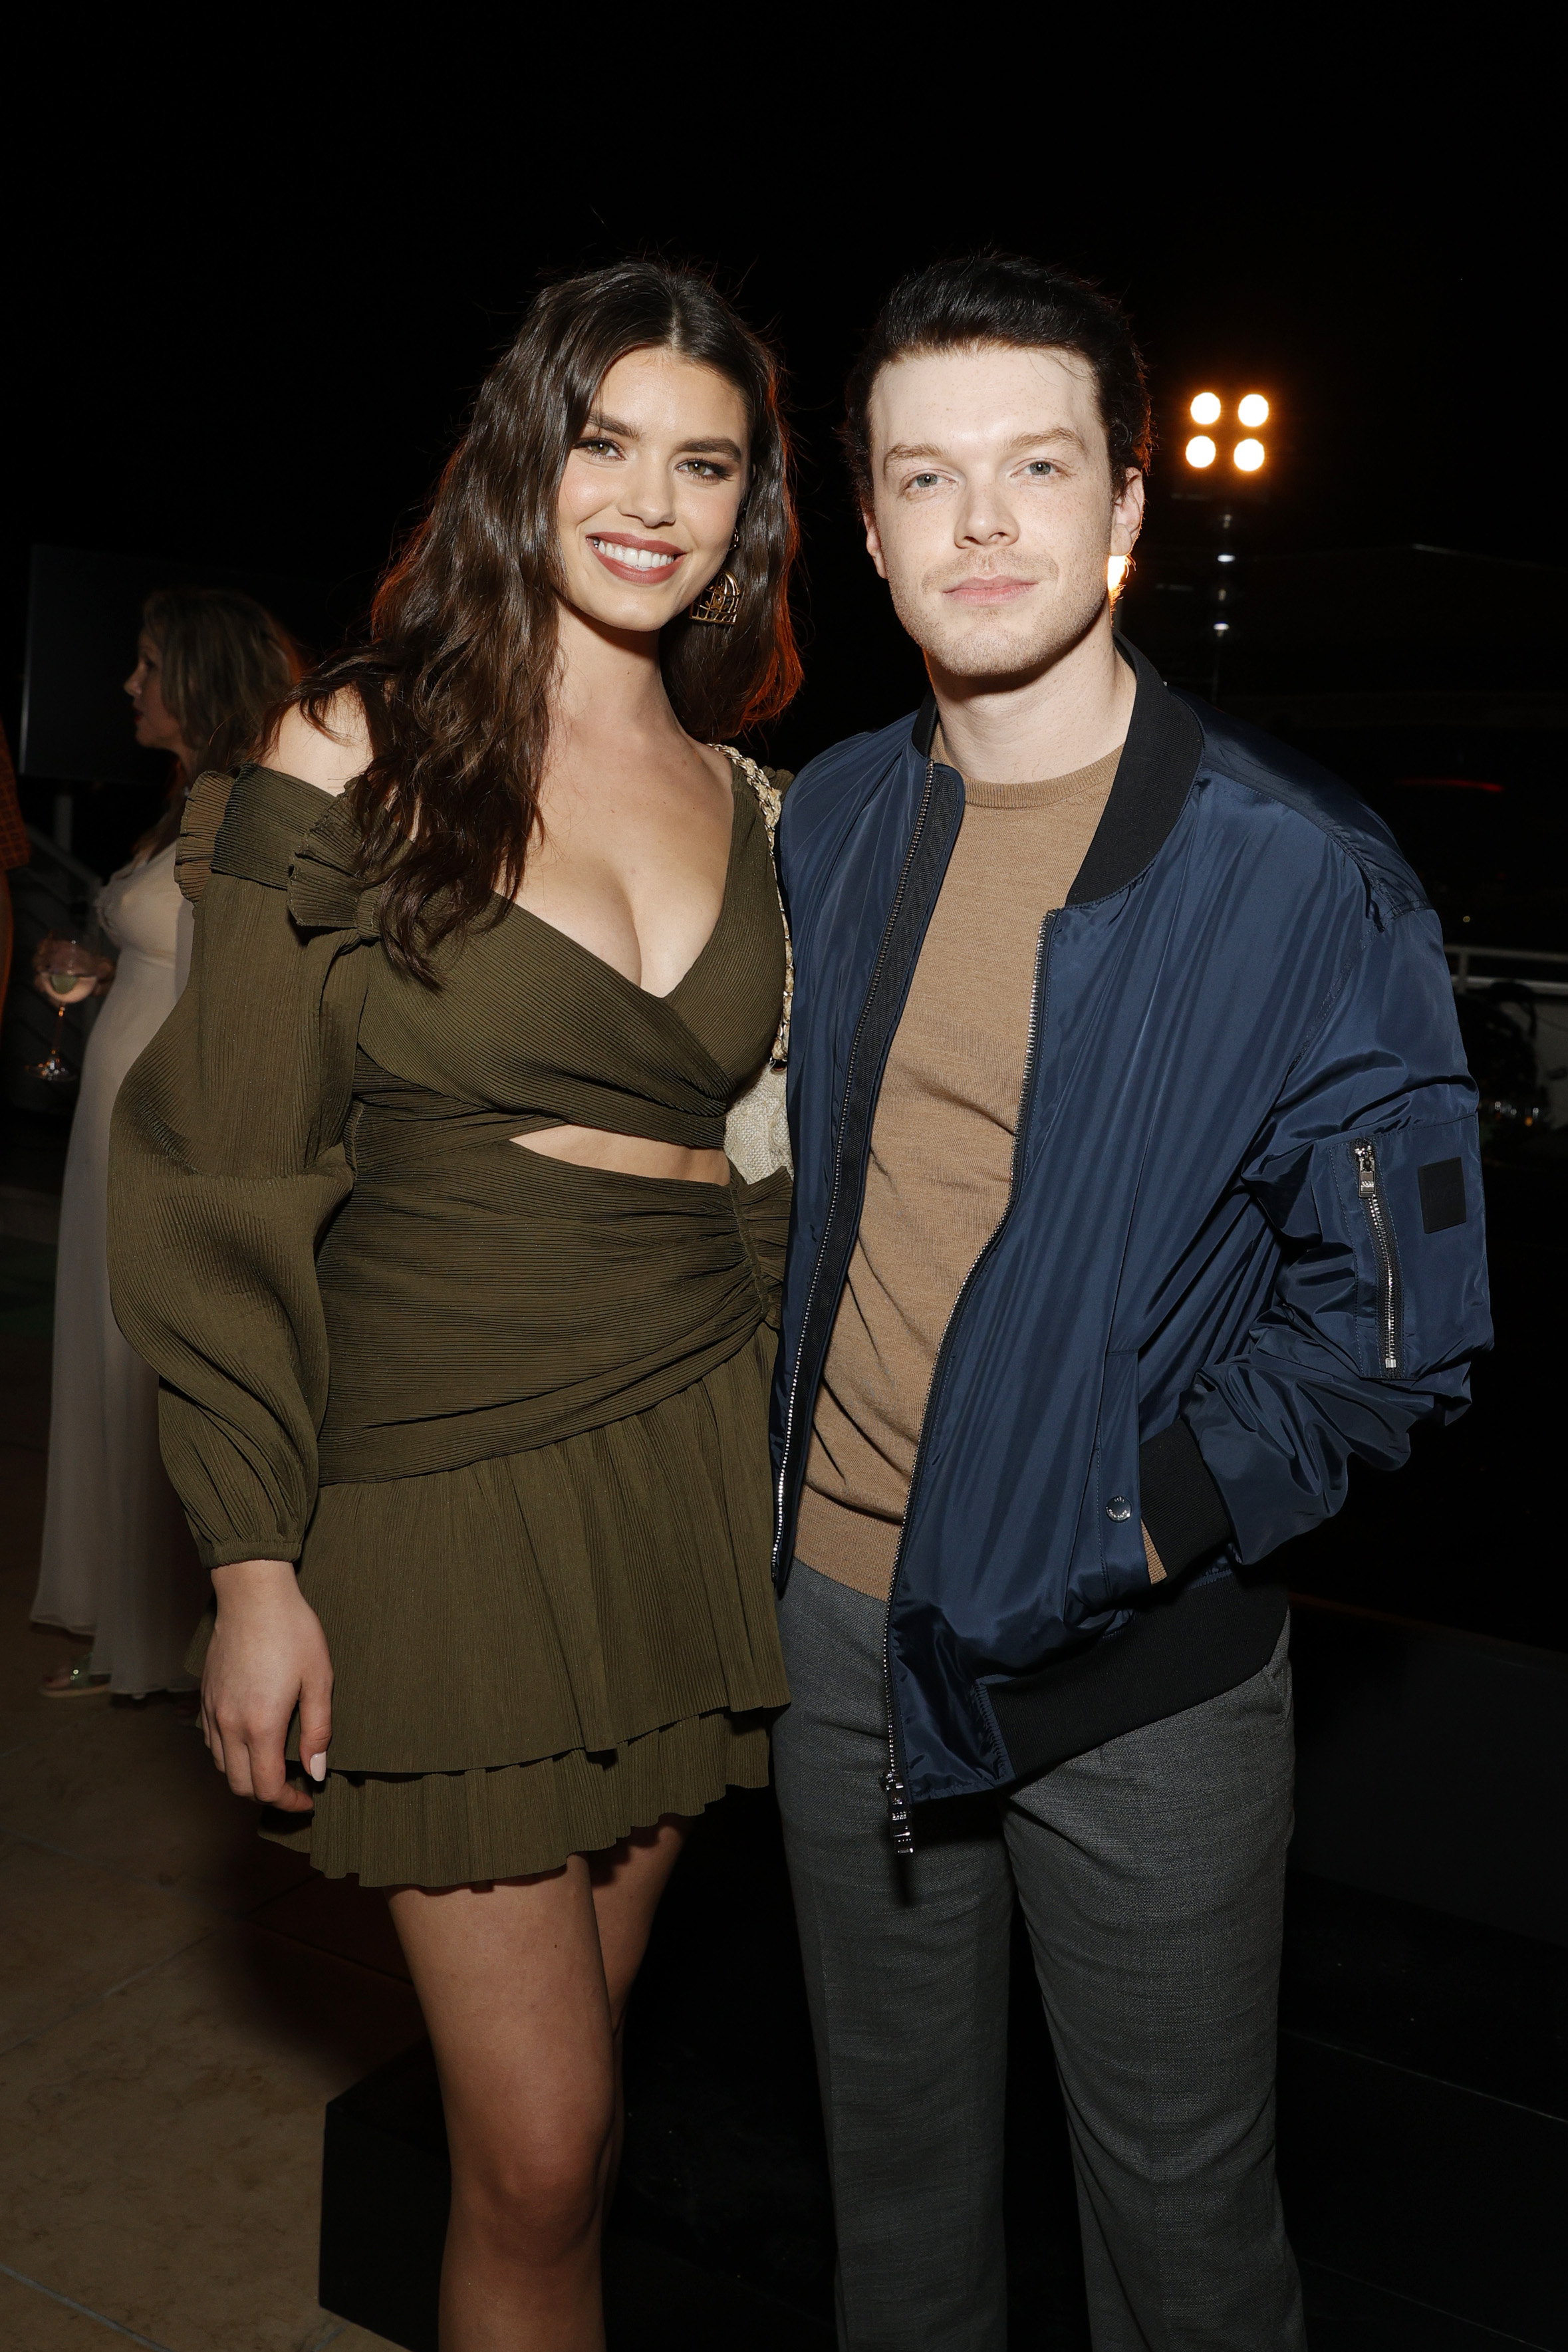 Lauren Searle and Cameron Monaghan on September 12, 2021 in Los Angeles, California | Source: Getty Images